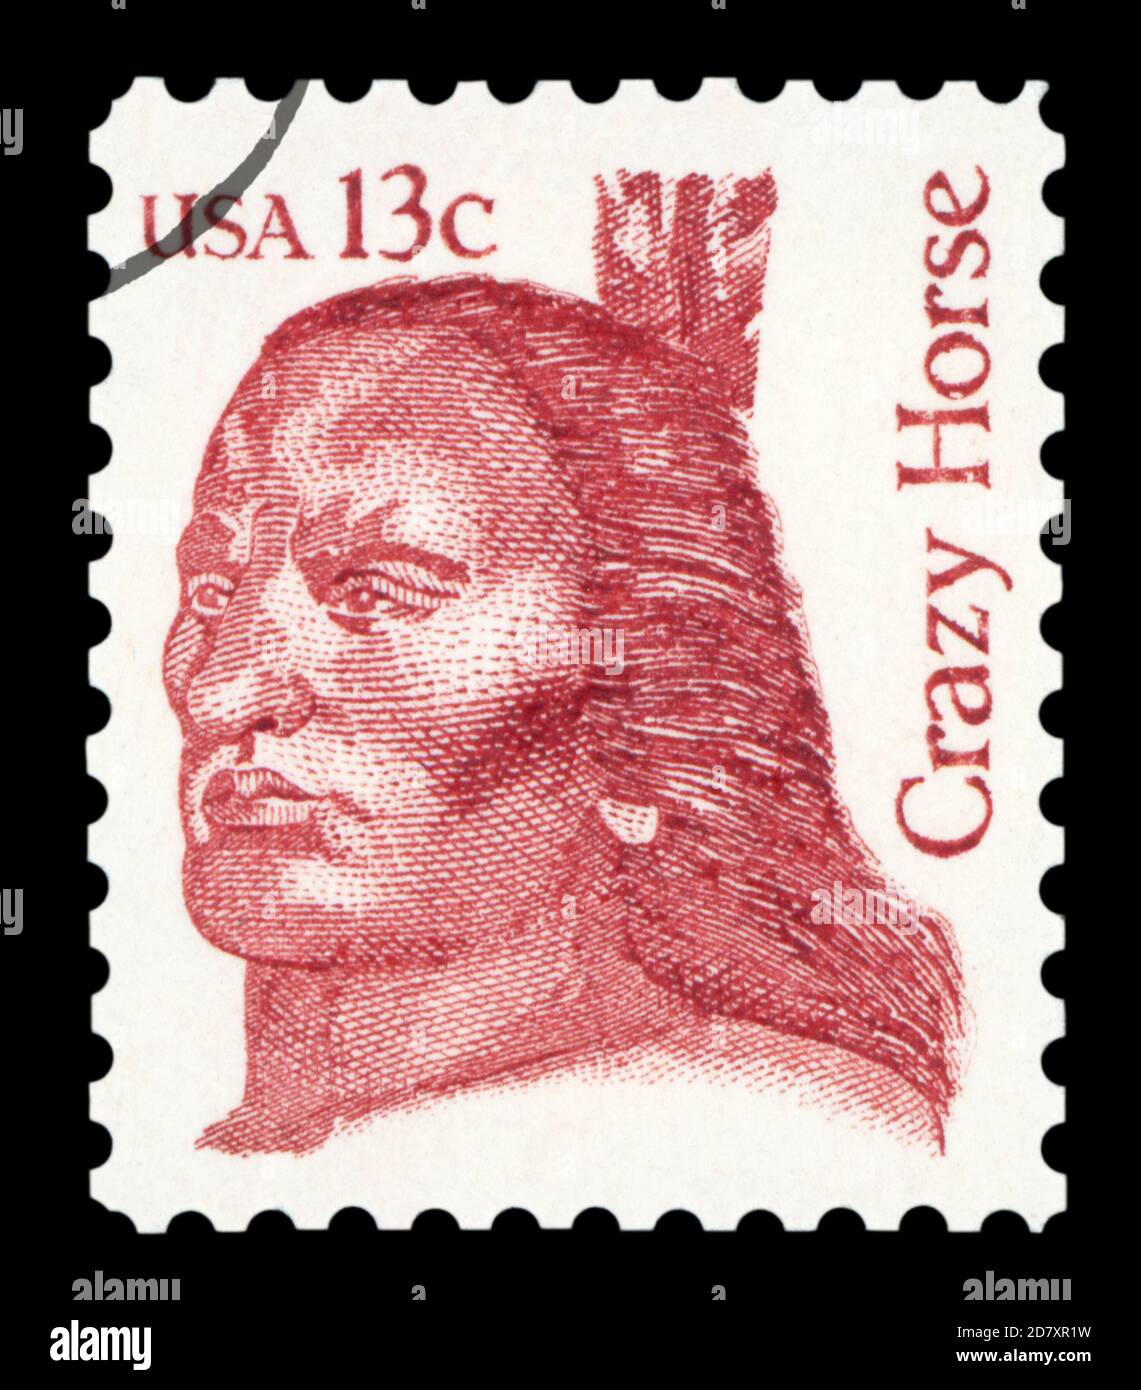 USA - CIRCA 1982: A stamp printed in United States of America shows Crazy Horse, leader of the tribe Oglala Sioux, circa 1982 Stock Photo